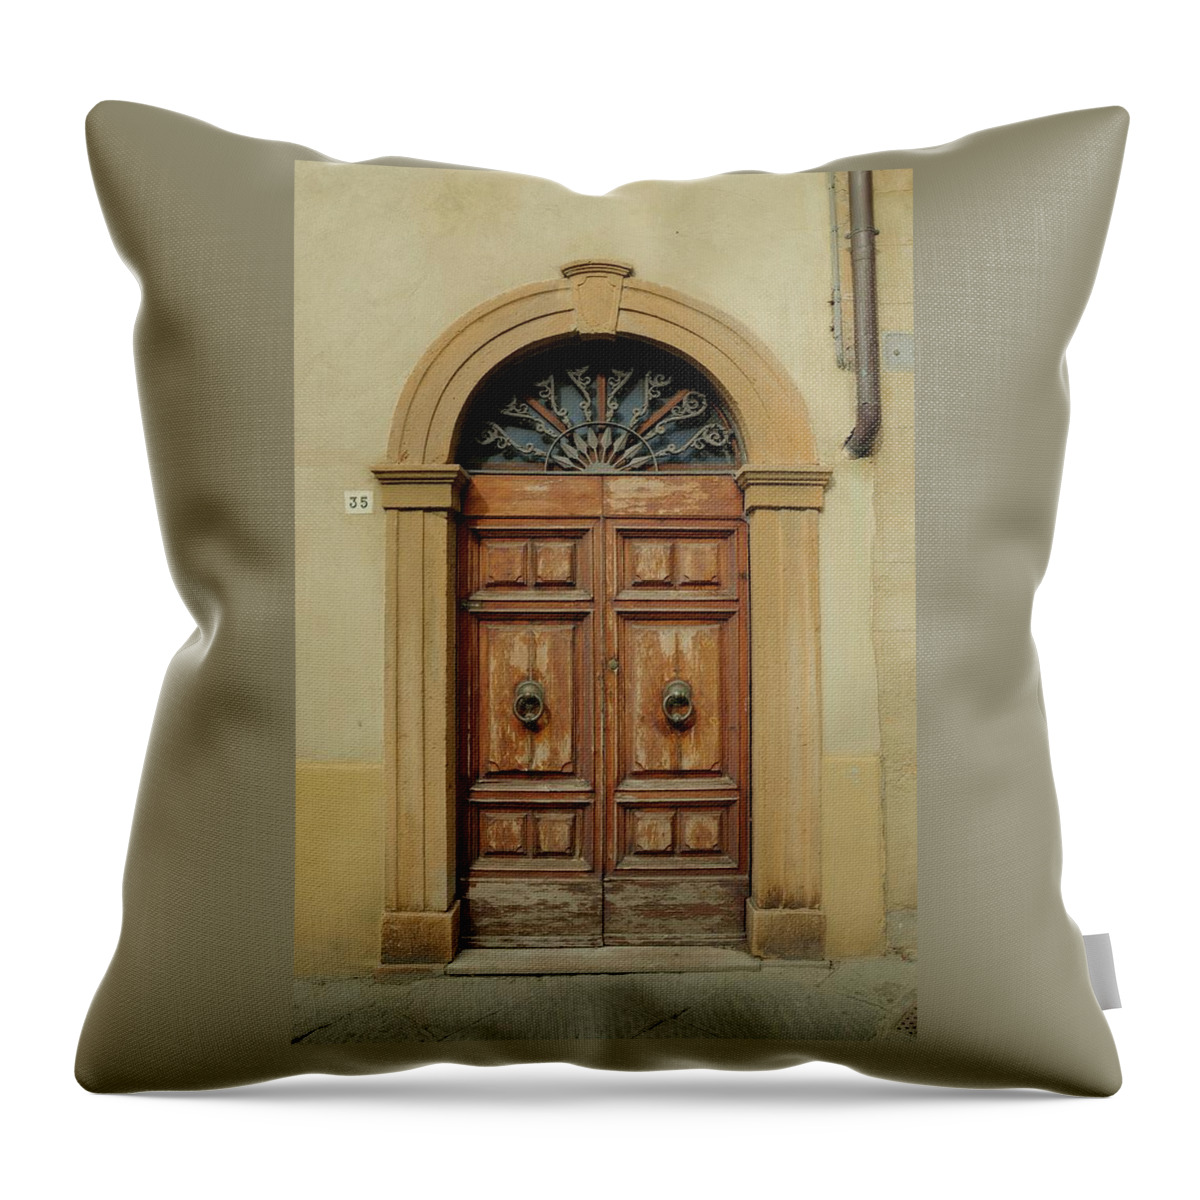 Europe Throw Pillow featuring the photograph Italy - Door One by Jim Benest